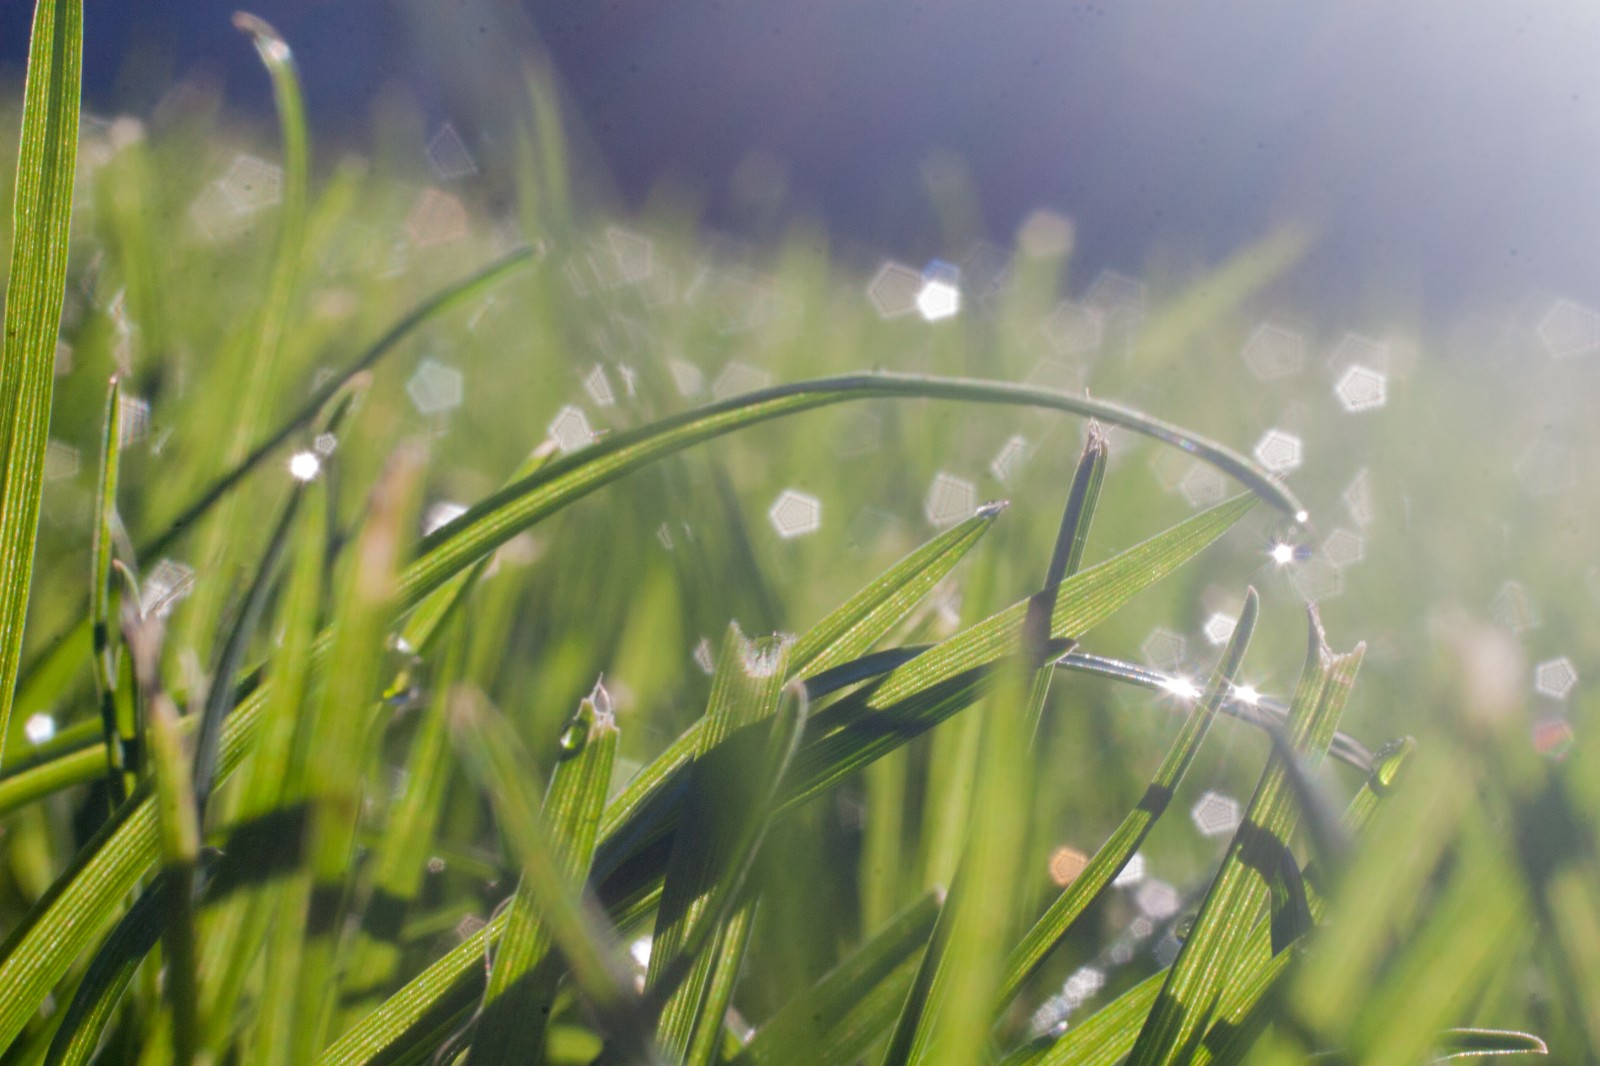 dew on a blade of grass in the morning sun